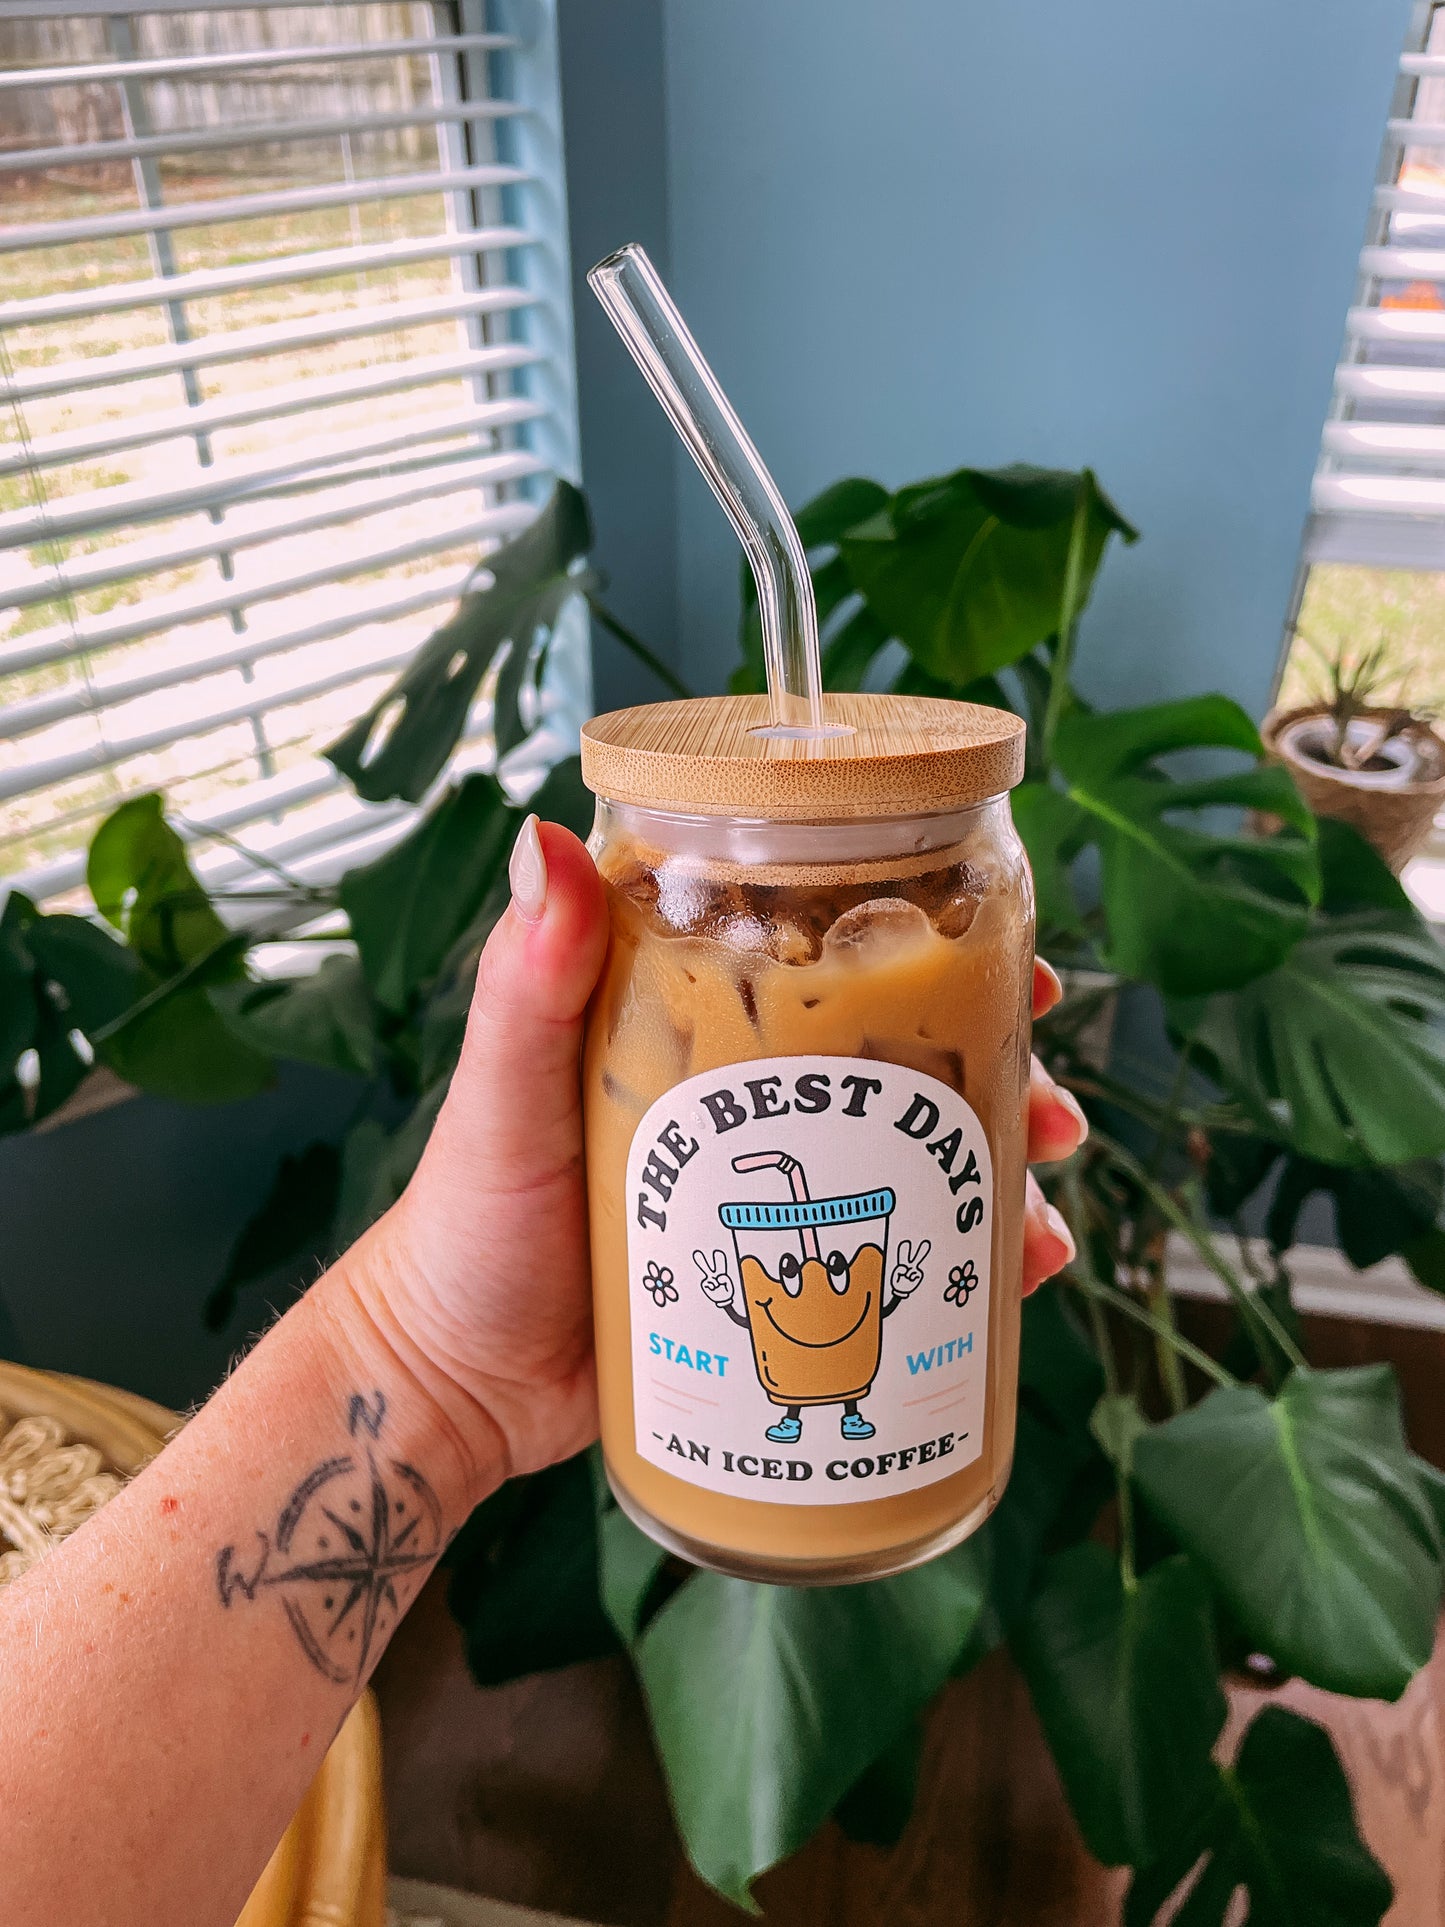 The Best Days Iced Coffee Glass